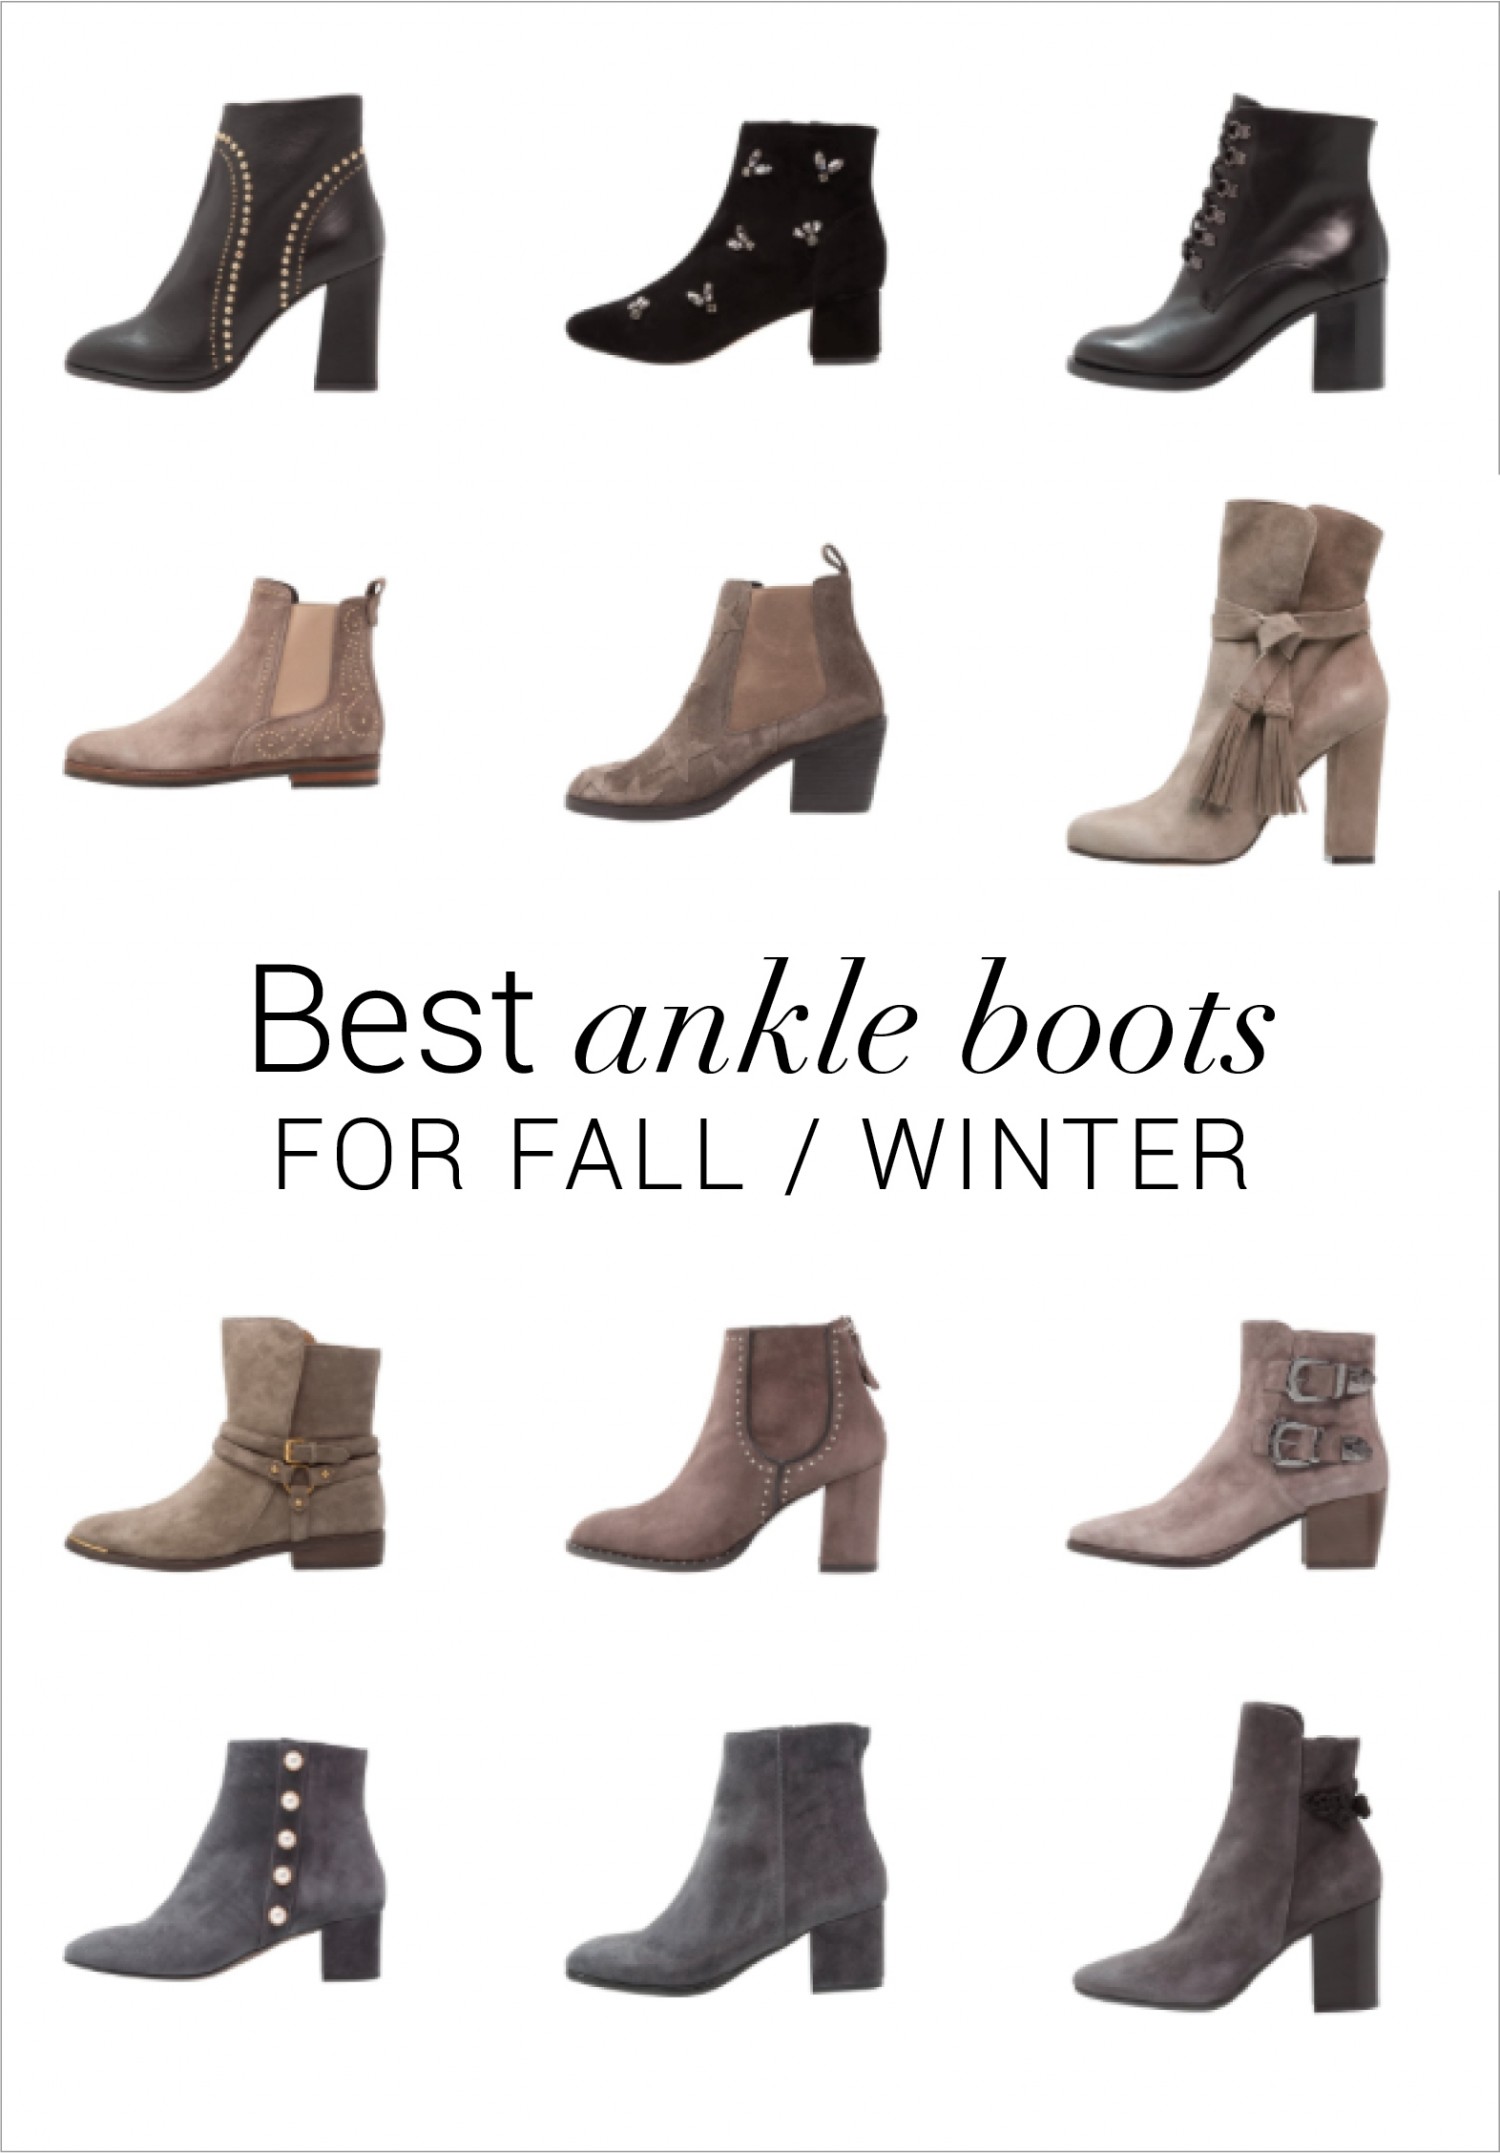 The best ankle boots for fall / winter - The Golden Bun